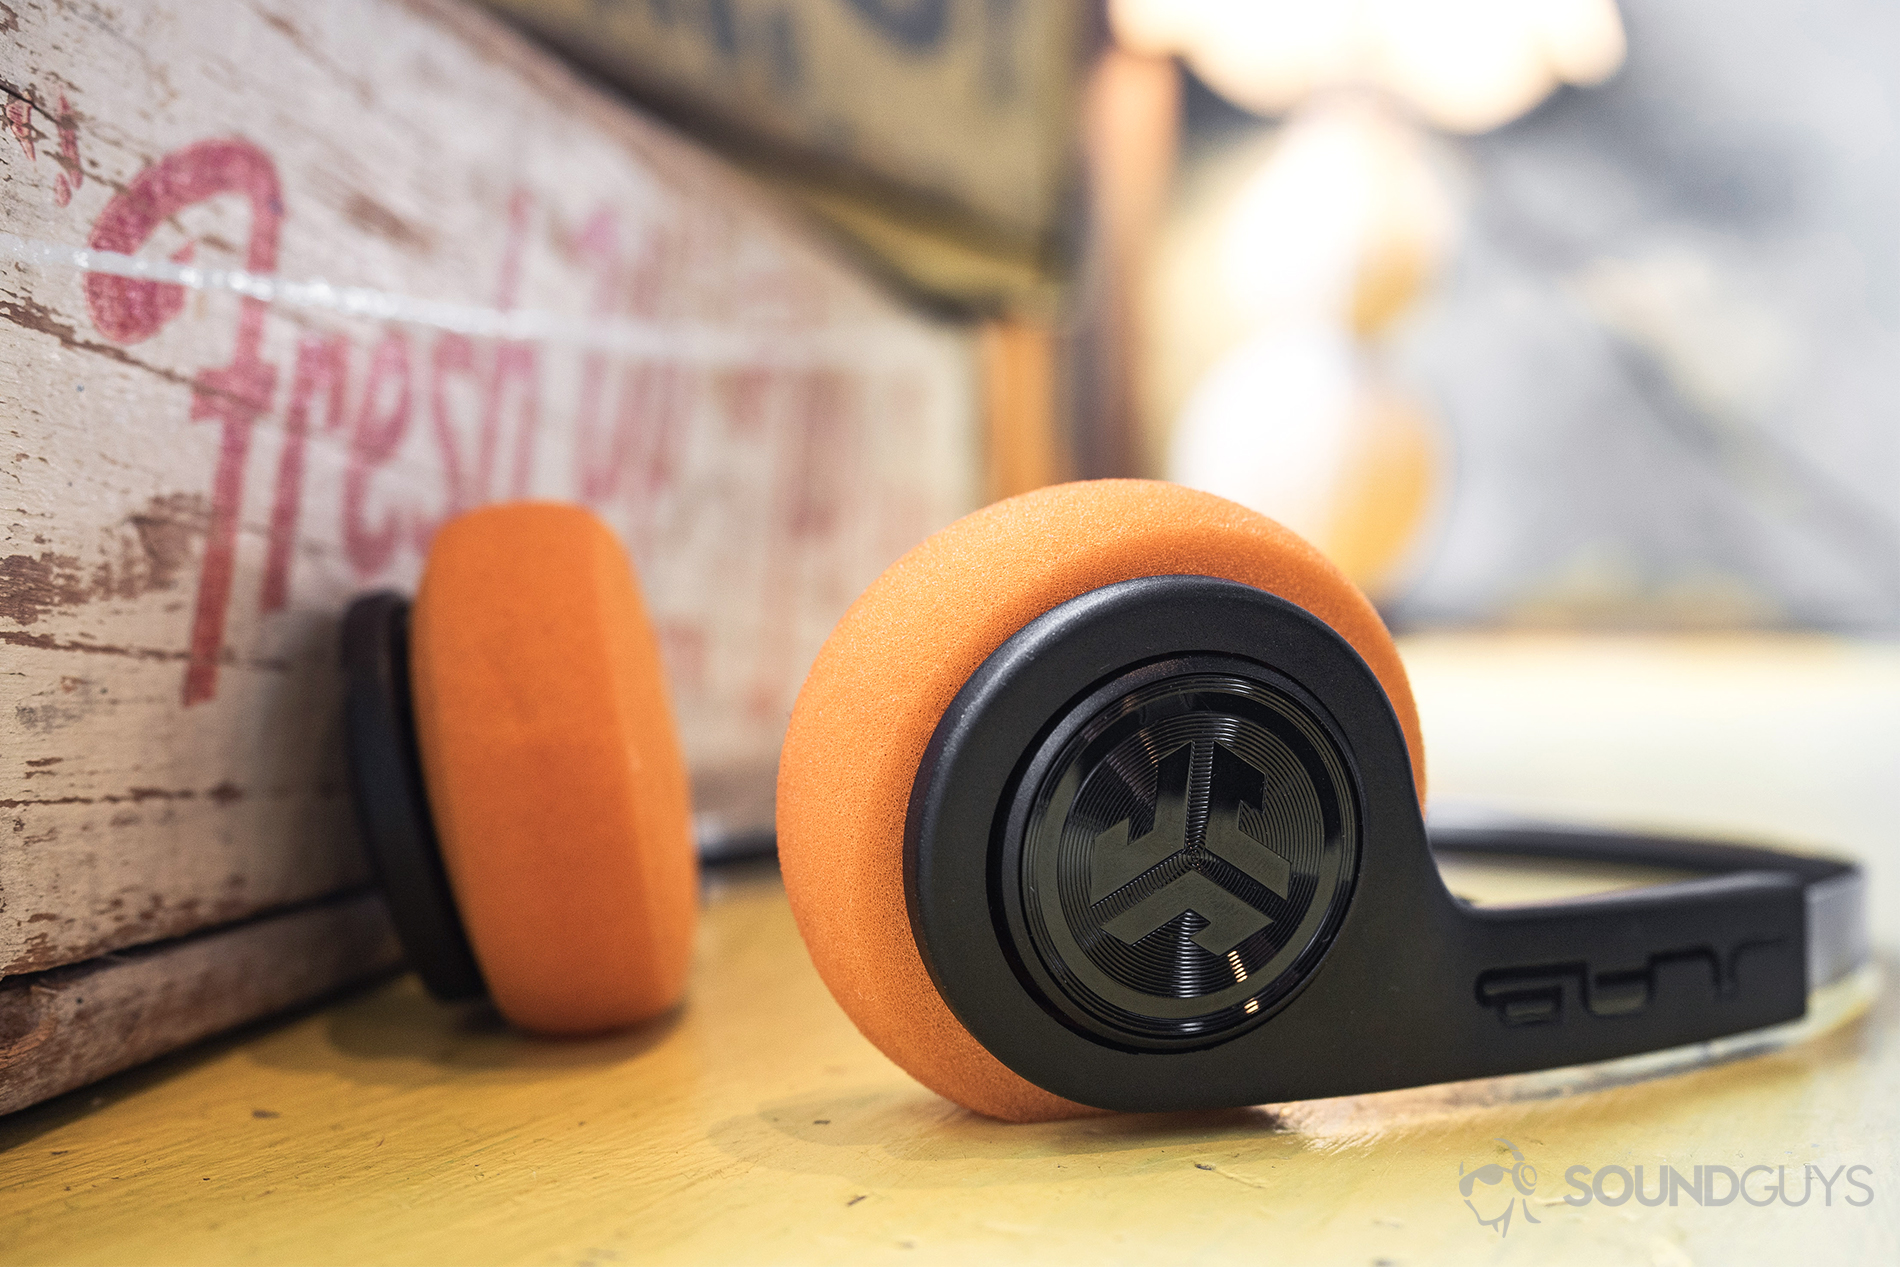 JLab Rewind Wireless Retro: The headphones laying flat on a table in front of some worn apple boxes.